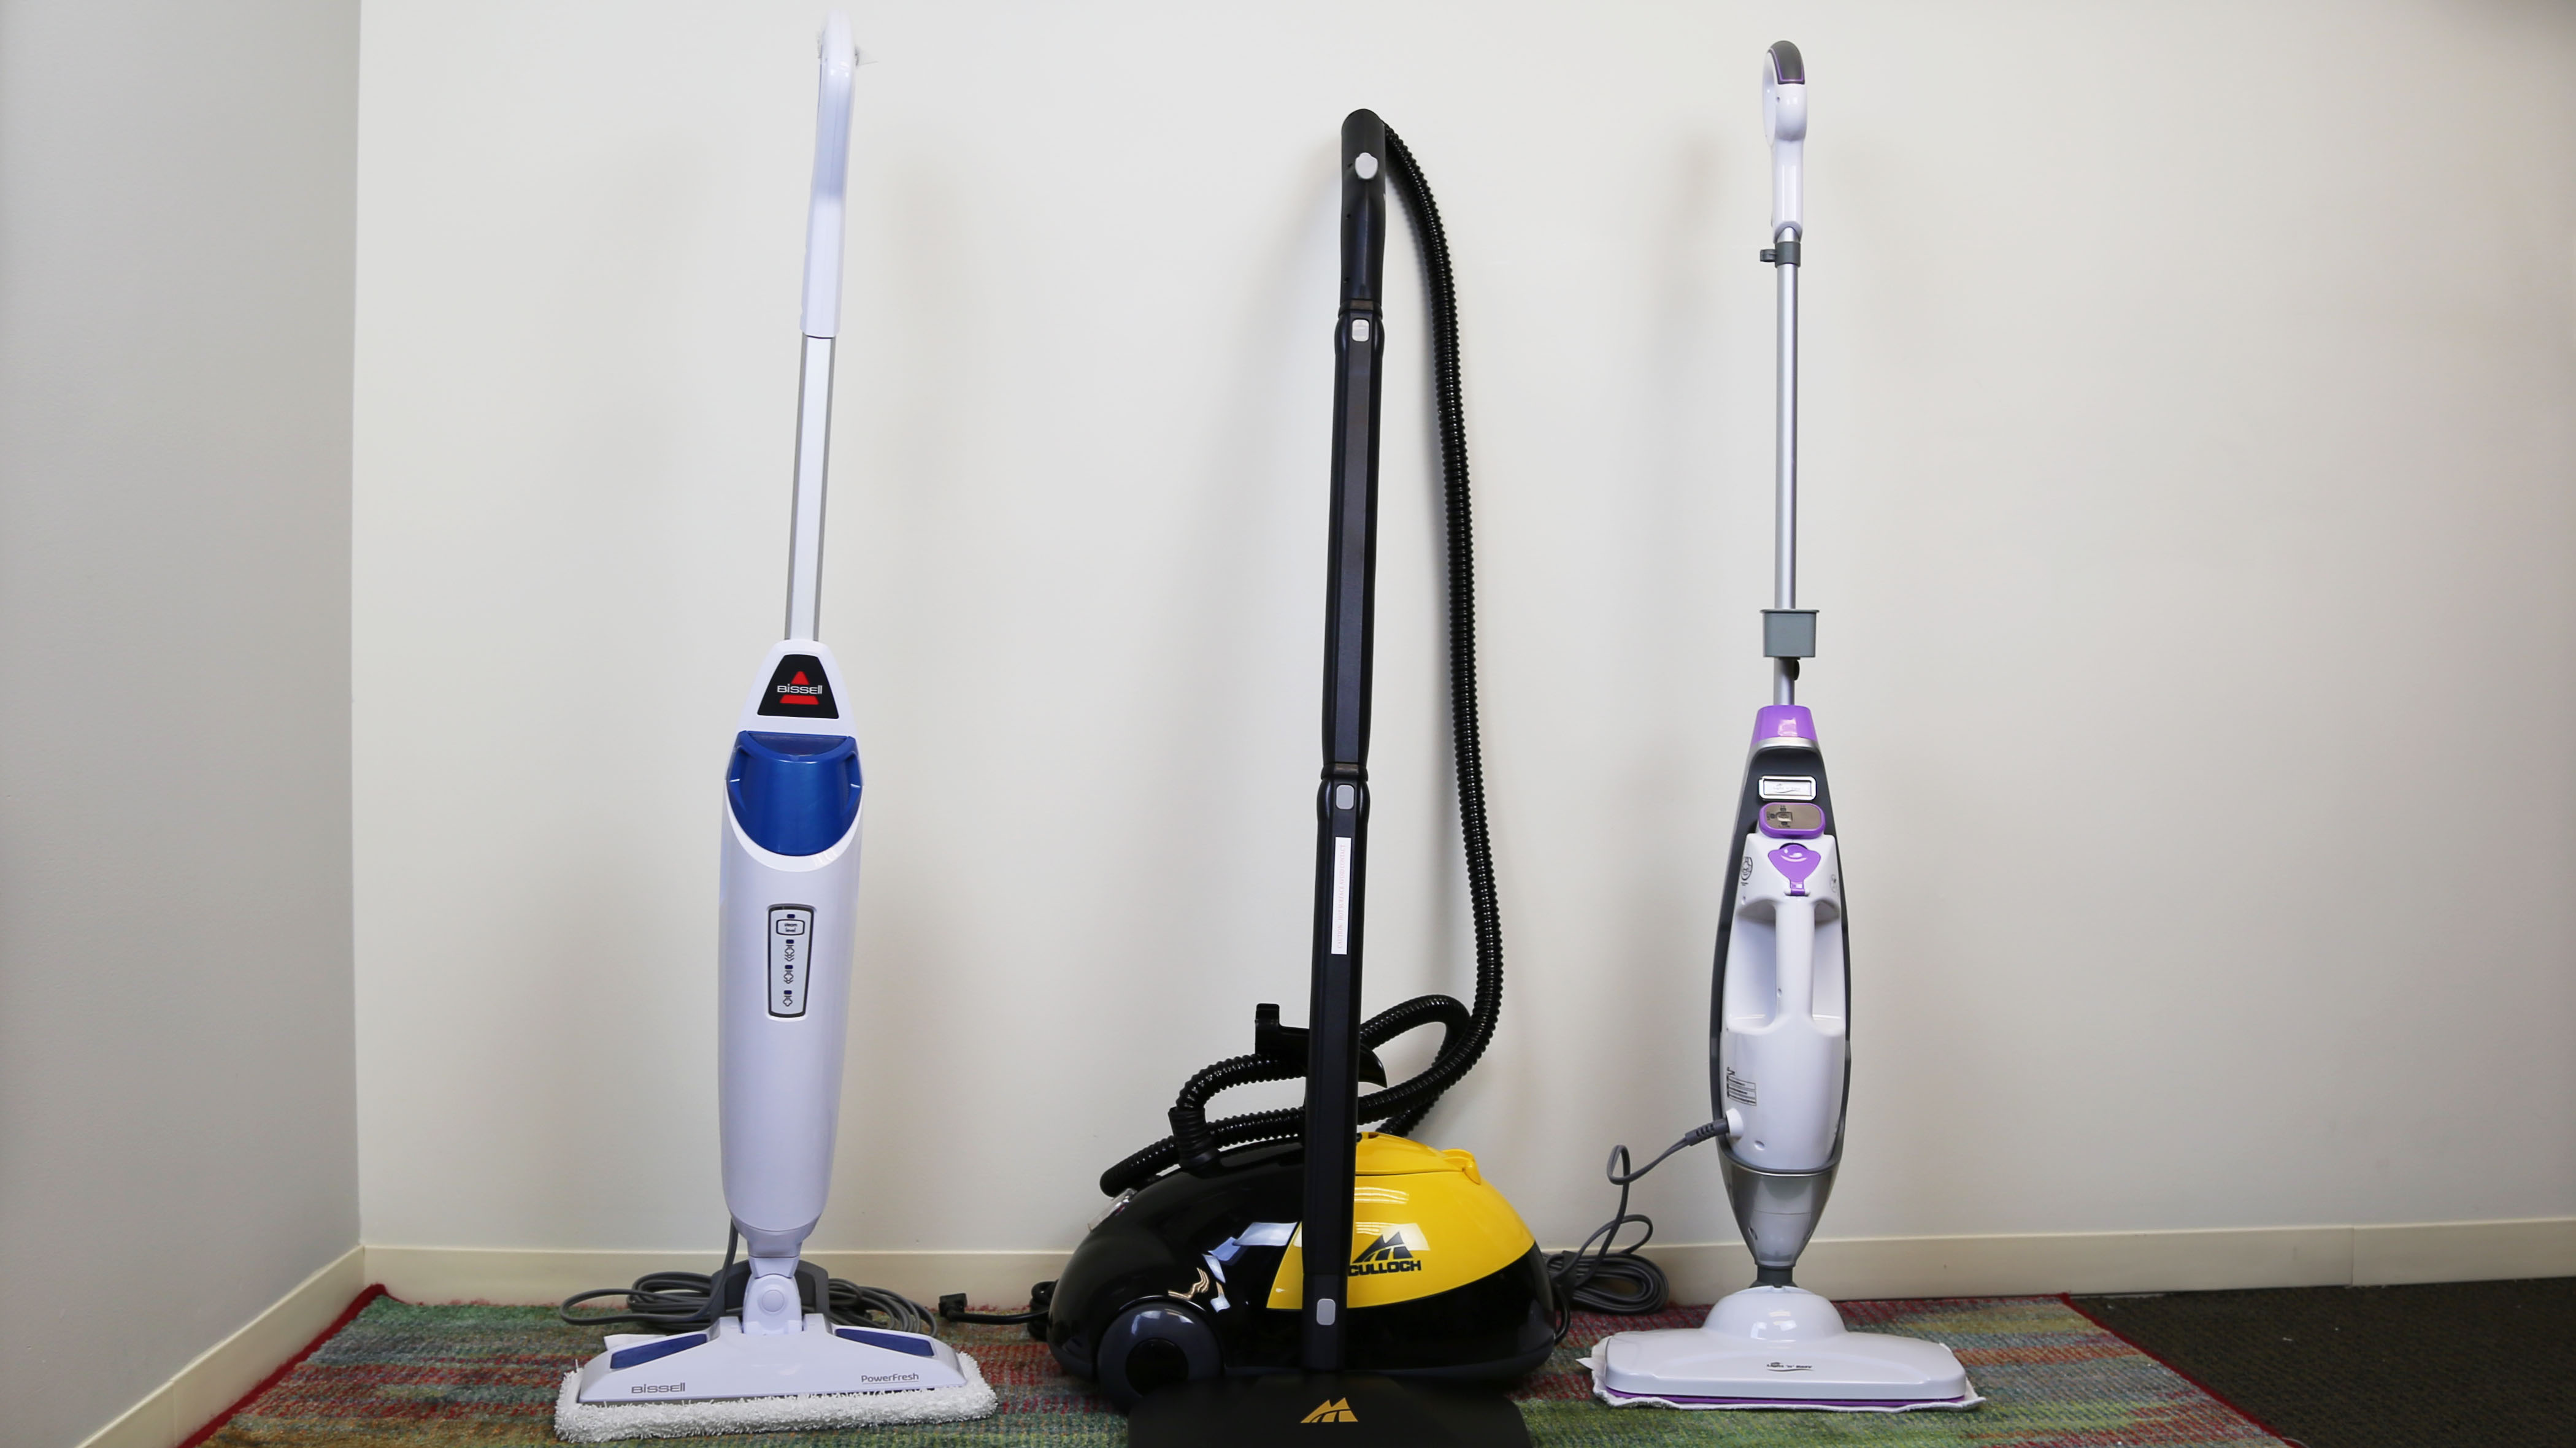 The Best Steam Cleaner April 2020